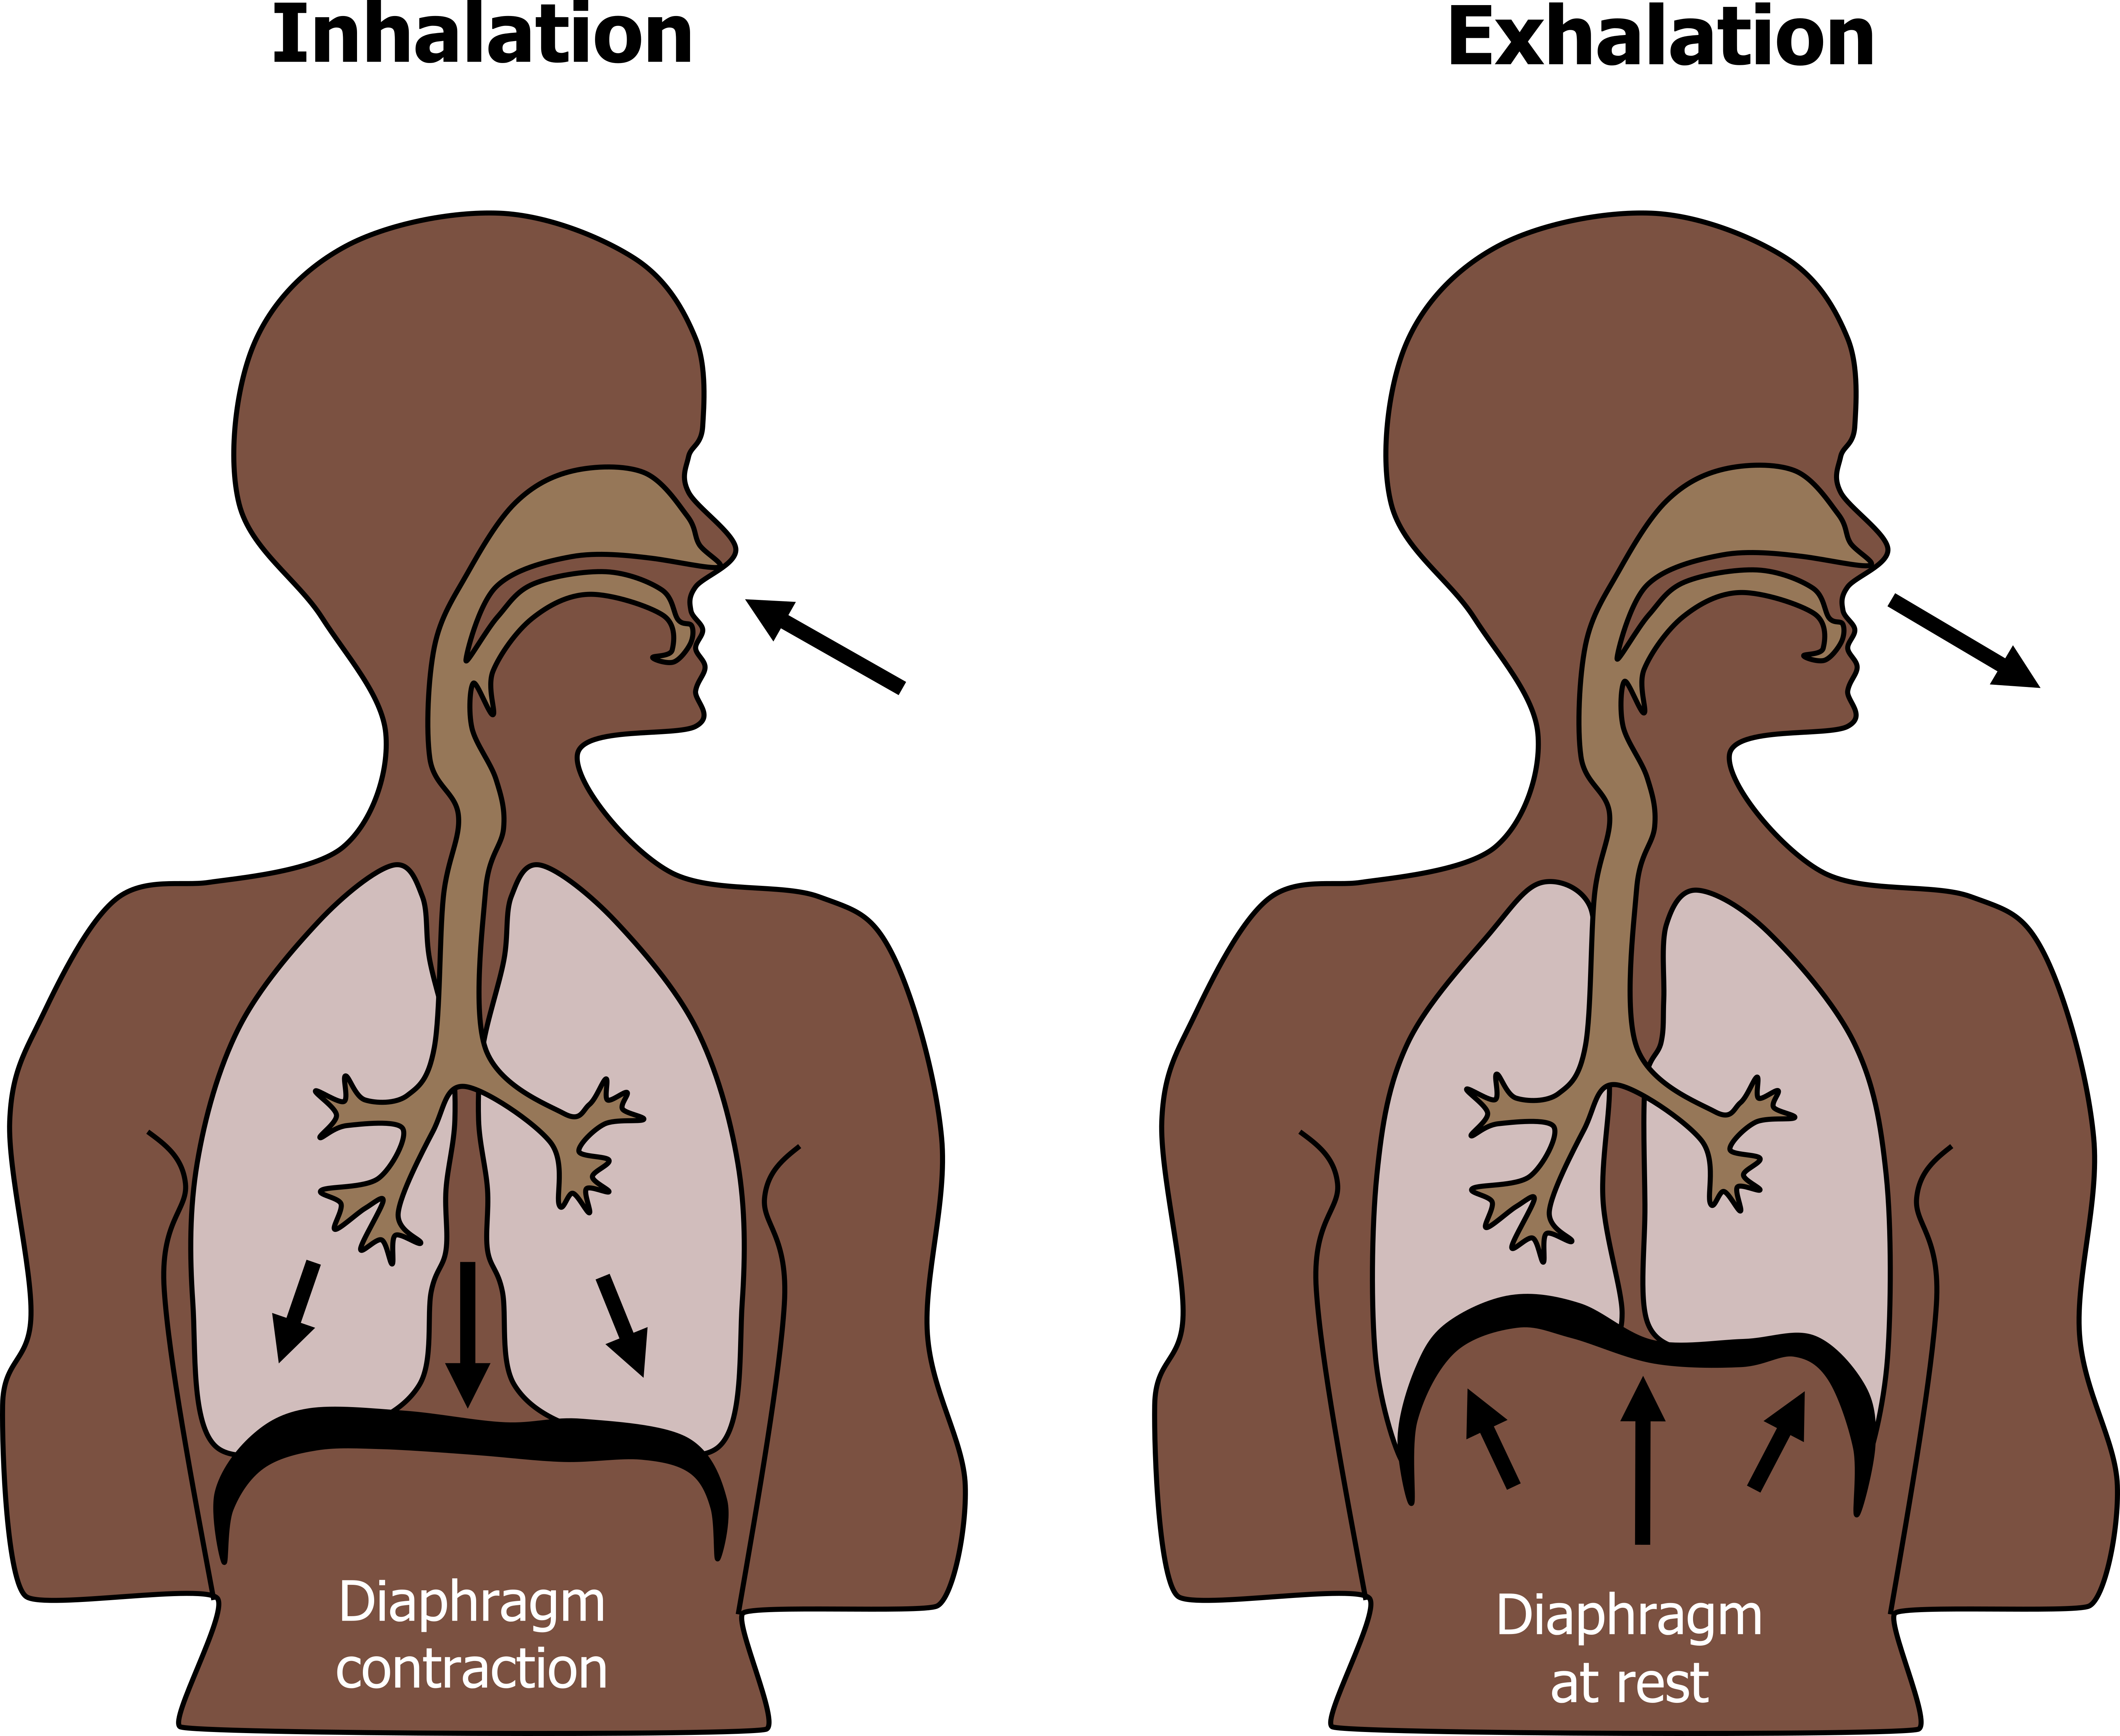 Figures depict a human outline with airway track and organs outlined. Inhalation - diaphragm contraction with arrows pointing down from the lungs into the diaphragm. Exhalation - diaphragm at rest with arrows pointing up from the diaphragm into the lungs.